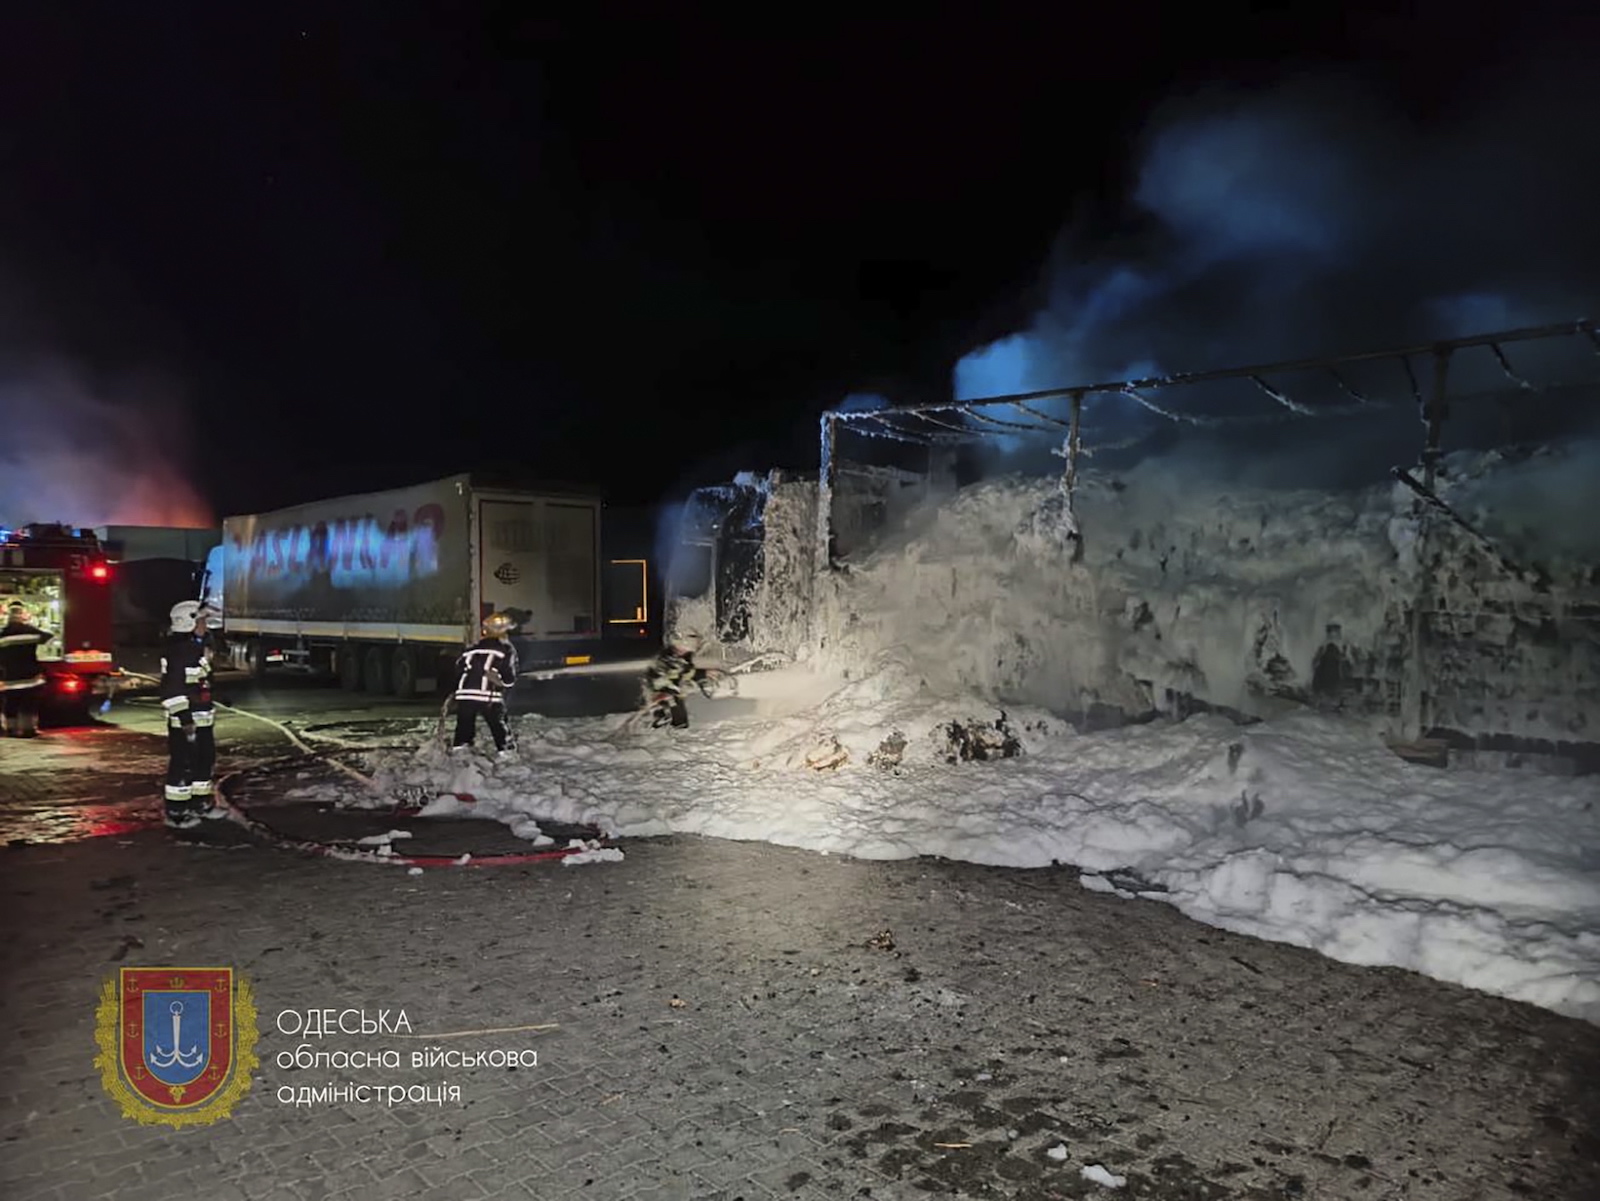 epa10883297 A handout photo made available by the Odesa Regional State Administration shows rescuers working to put down a fire after an overnight attack of a seaport infrastructure object in the Odesa region, southern Ukraine, 26 September 2023. At least two people were injured in the attack according to Oleg Kiper, the Head of Odesa Regional State Administration. Russian troops entered Ukrainian territory in February 2022, starting a conflict that has provoked destruction and a humanitarian crisis.  EPA/ODESA REGIONAL STATE ADMINISTRATION / HANDOUT HANDOUT  HANDOUT EDITORIAL USE ONLY/NO SALES